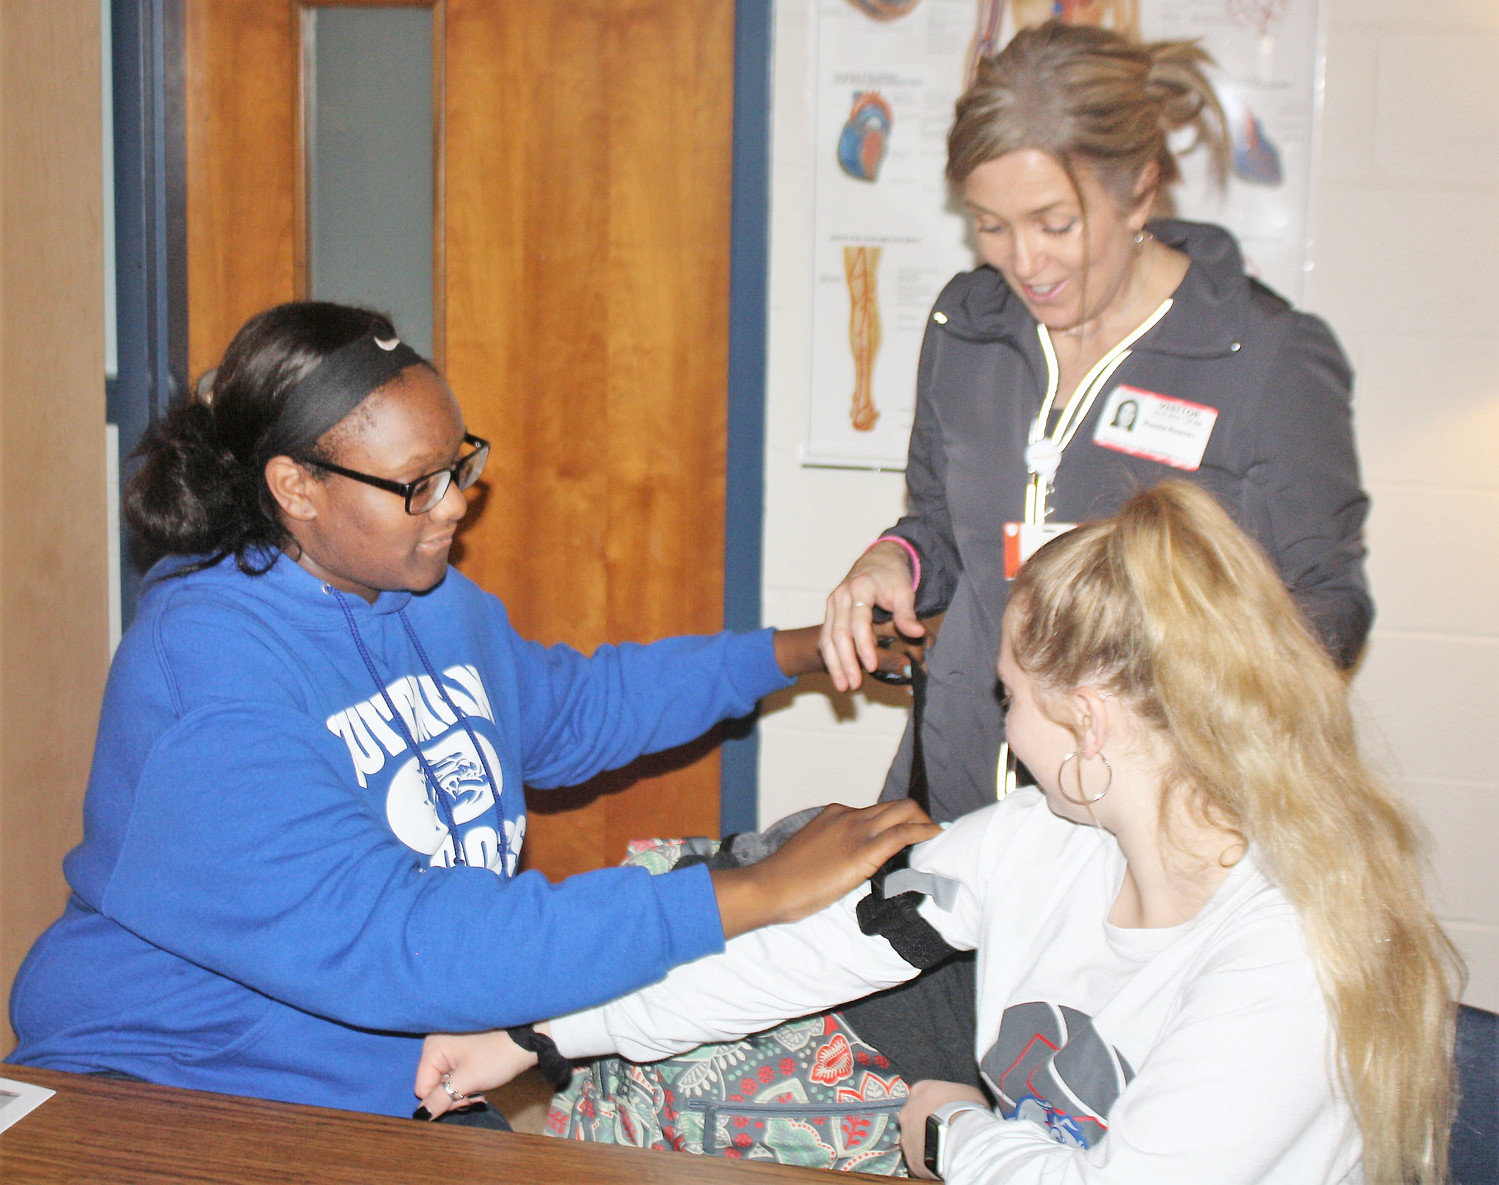 Assisted by UT Health Quitman nurse Ronna Reaves, Quitman High School health student Utopia Henry (left) wraps a tourniquet around classmate Ashlynn Cockerham (right) during the UT Health East Texas EMS “Stop the Bleeding” training.  (Monitor photo by Zak Wellerman)